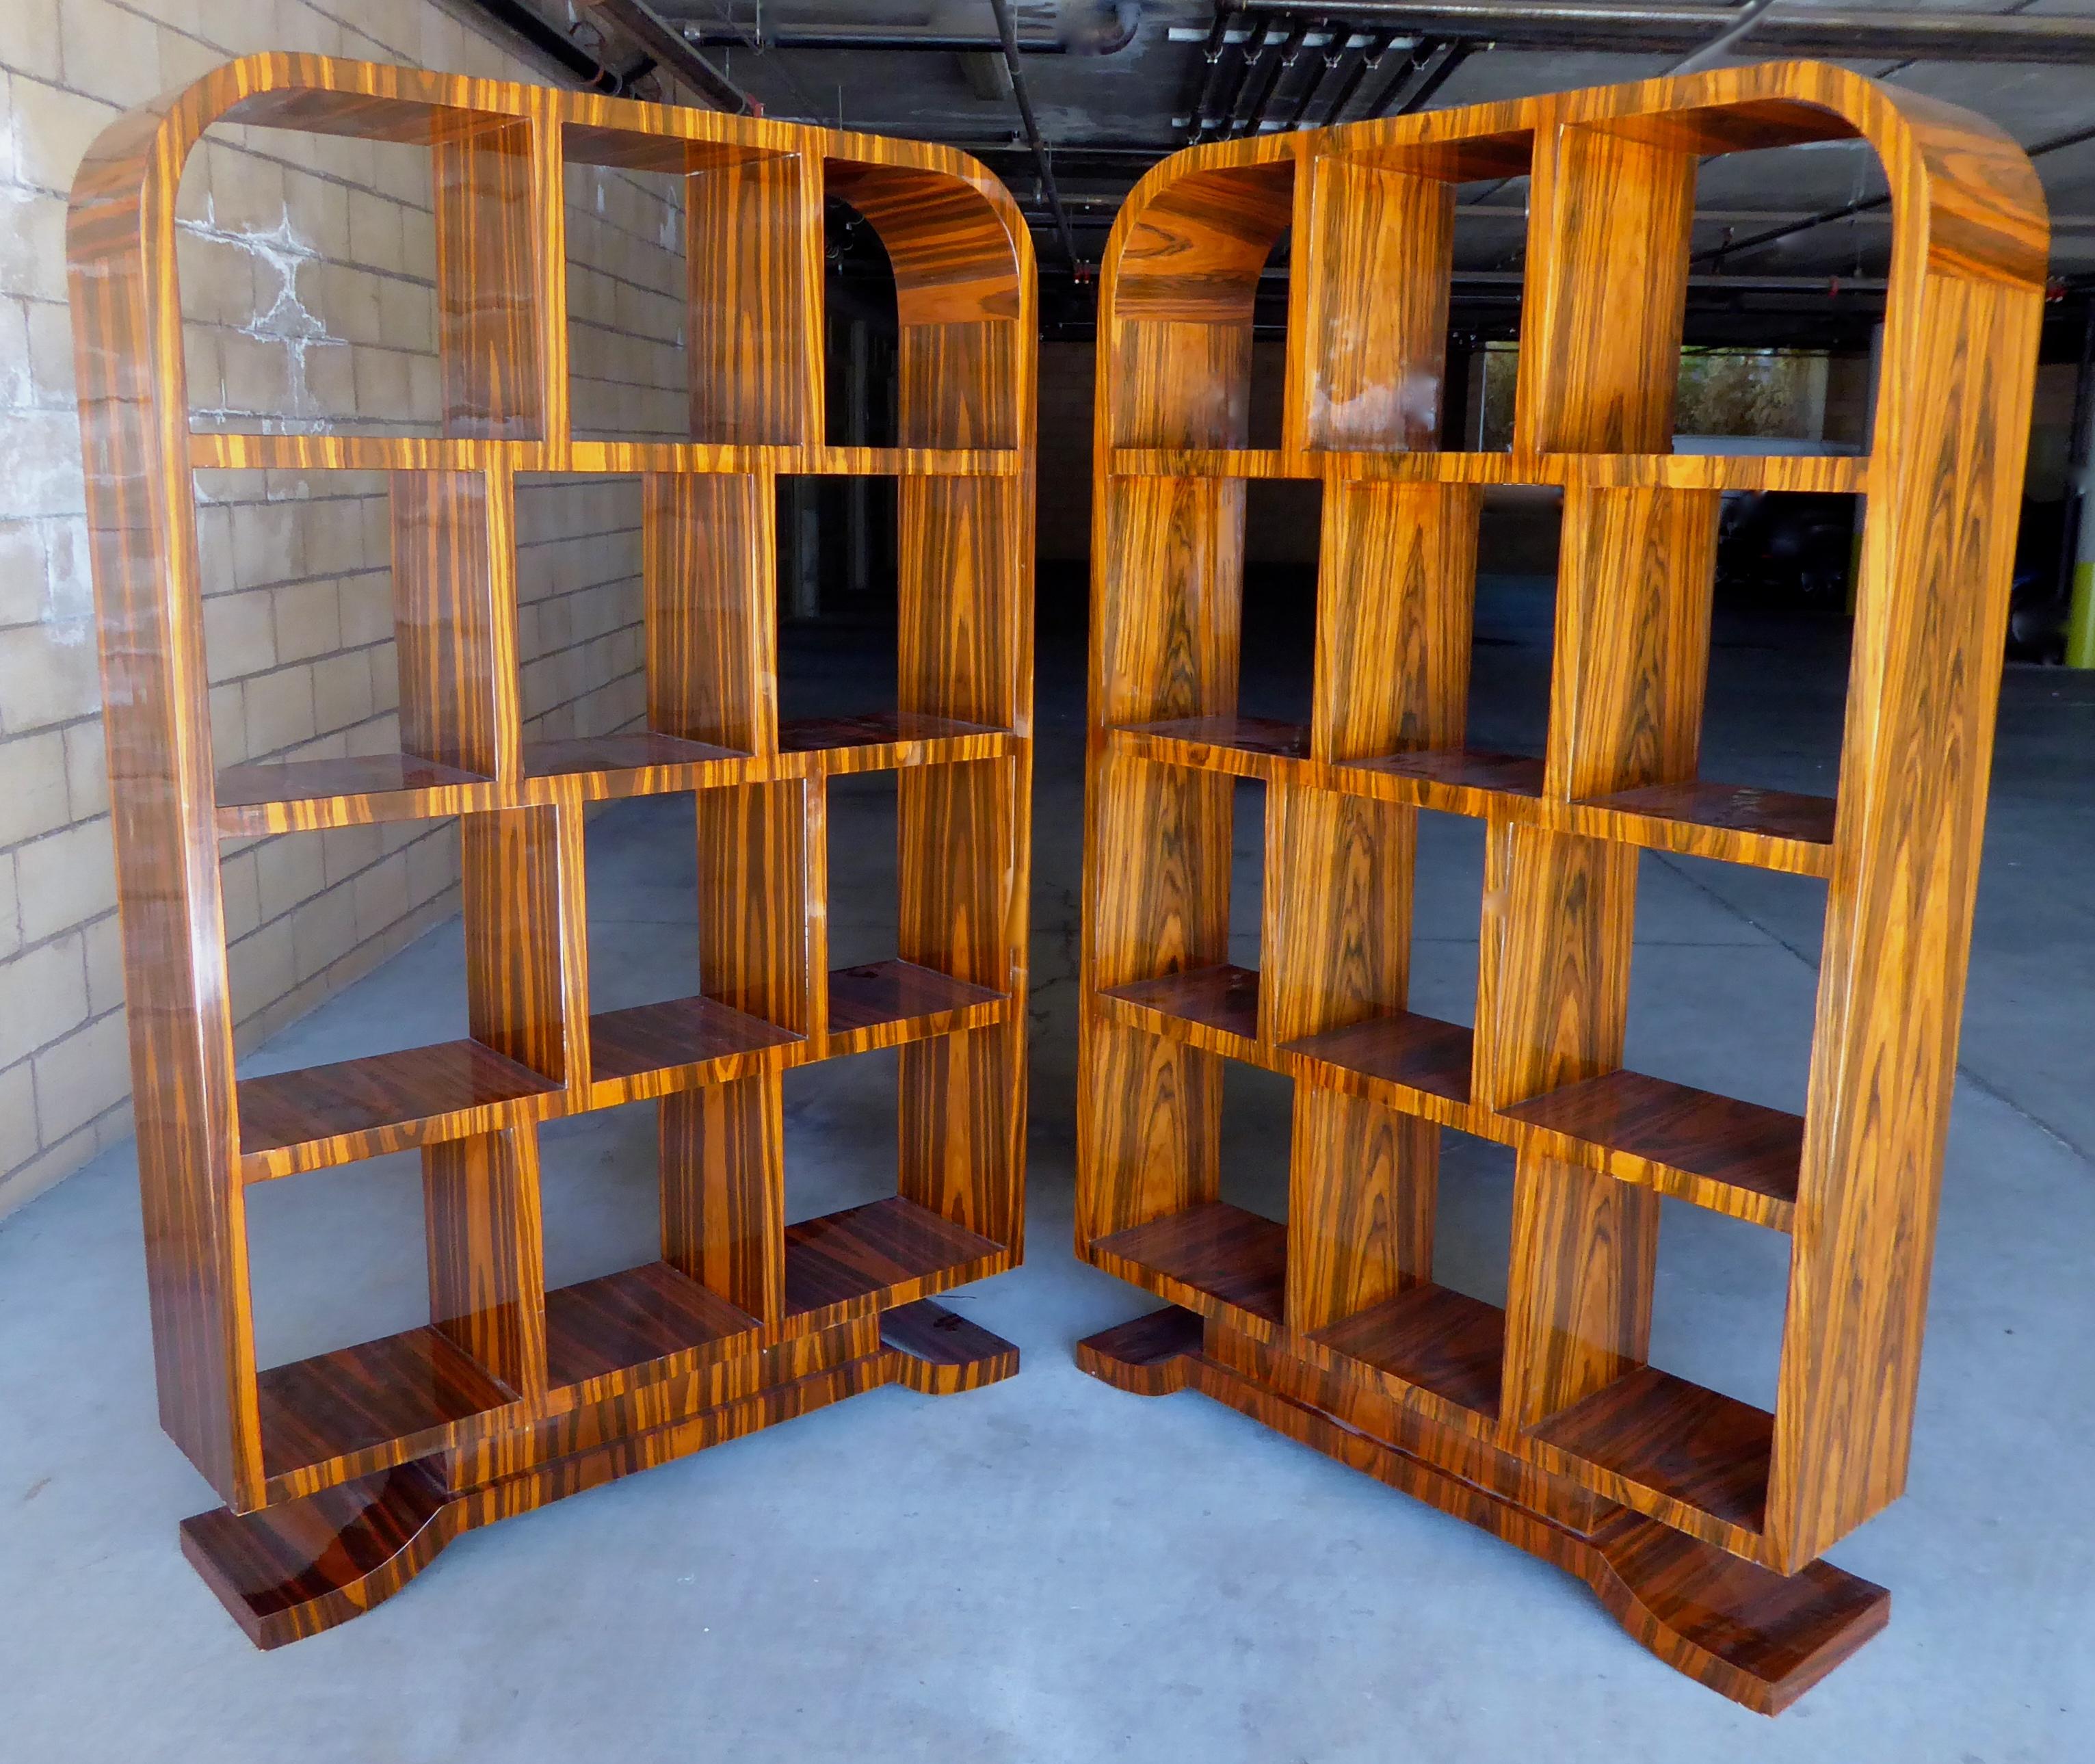 A pair of Art Deco style Macassar ebony bookshelves, circa 1980s. Choice ebony veneers cover literally every surface, including the undersides of all of the shelves. We believe that these were custom made due to the high quality materials that were